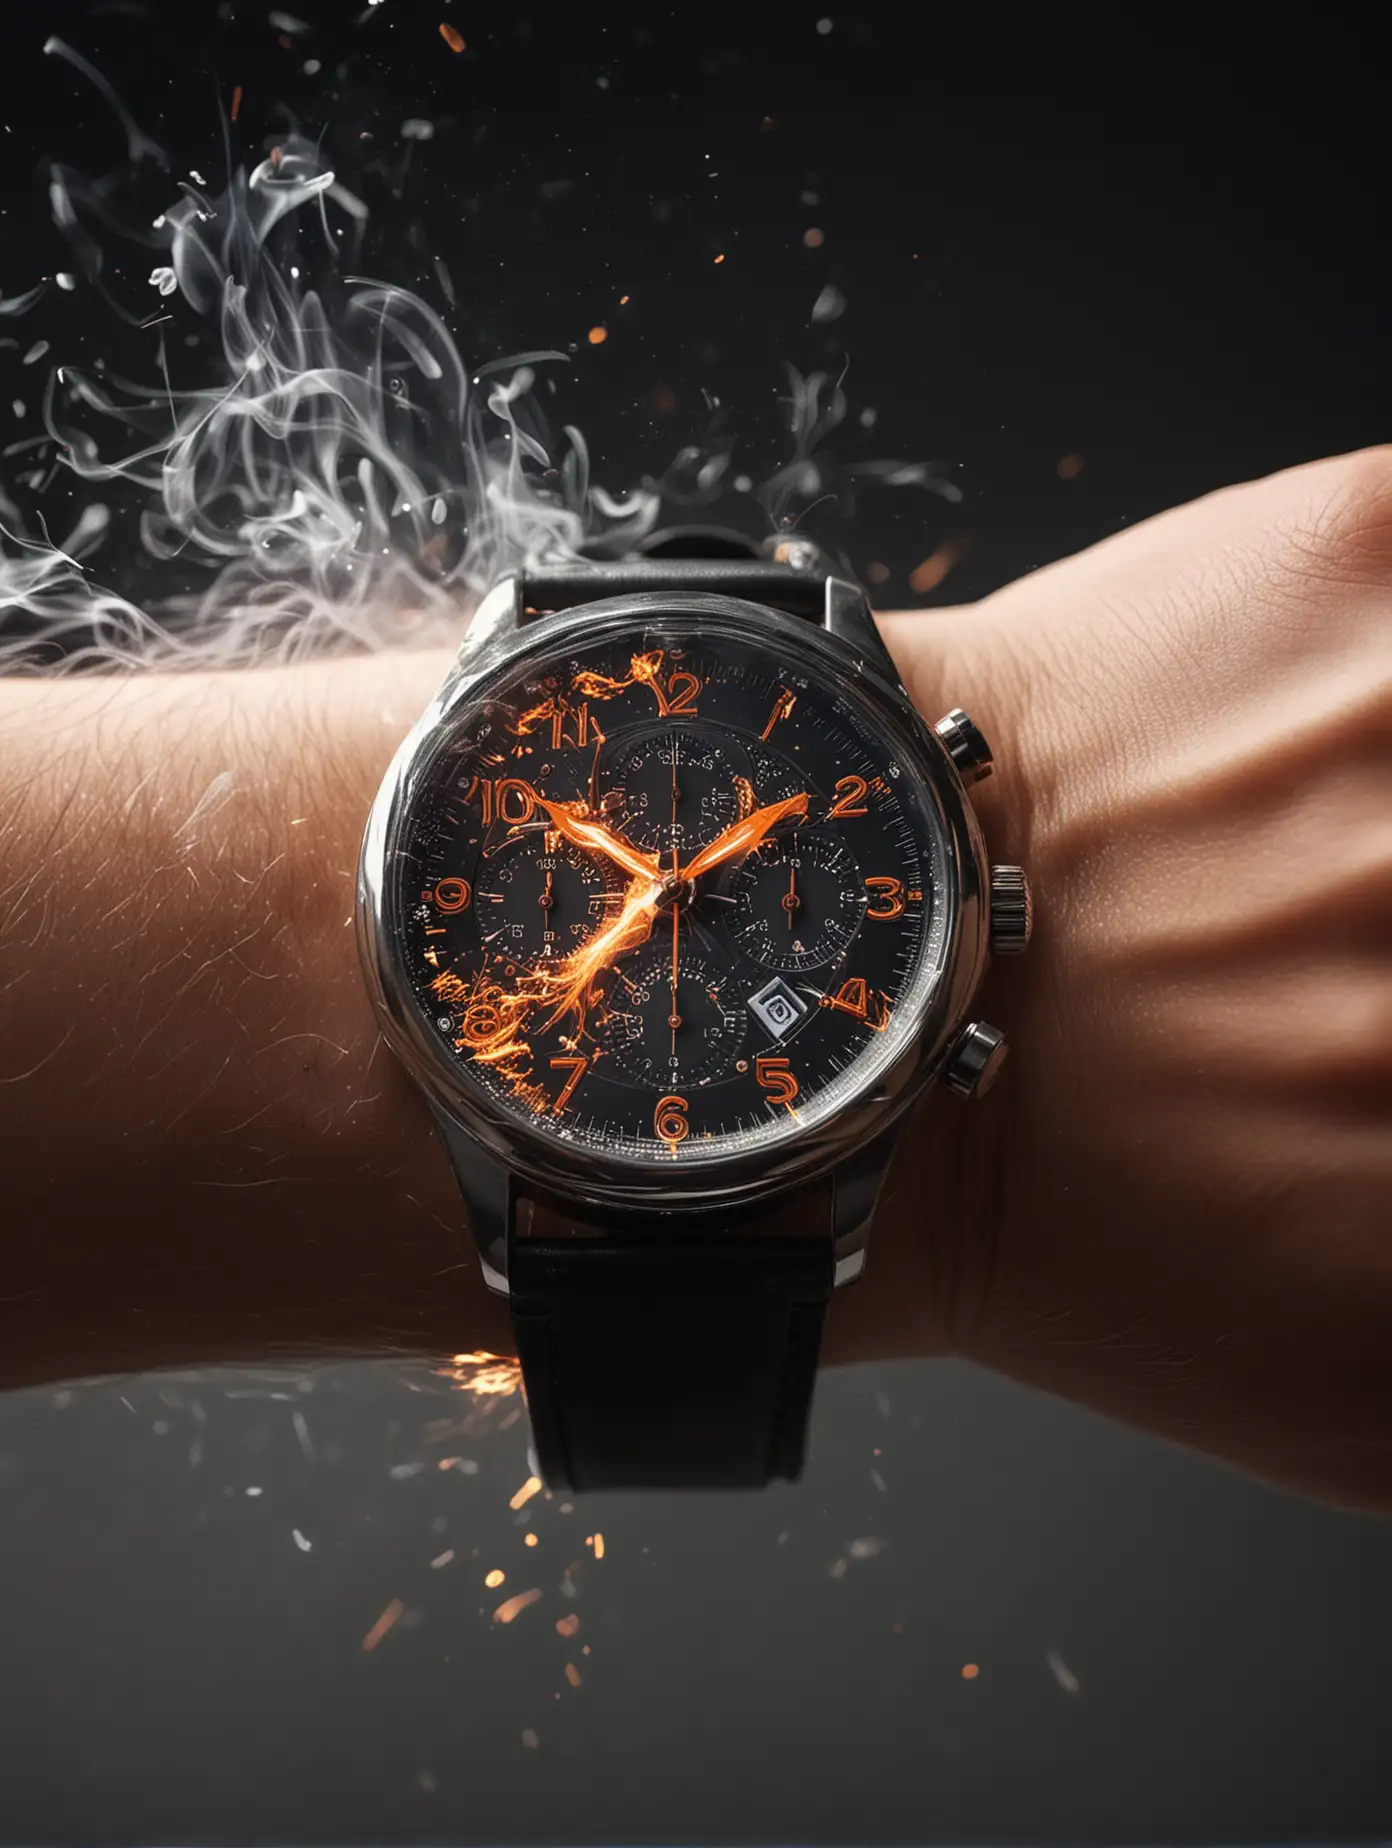 sparks and smoke coming from behind a wrist watch